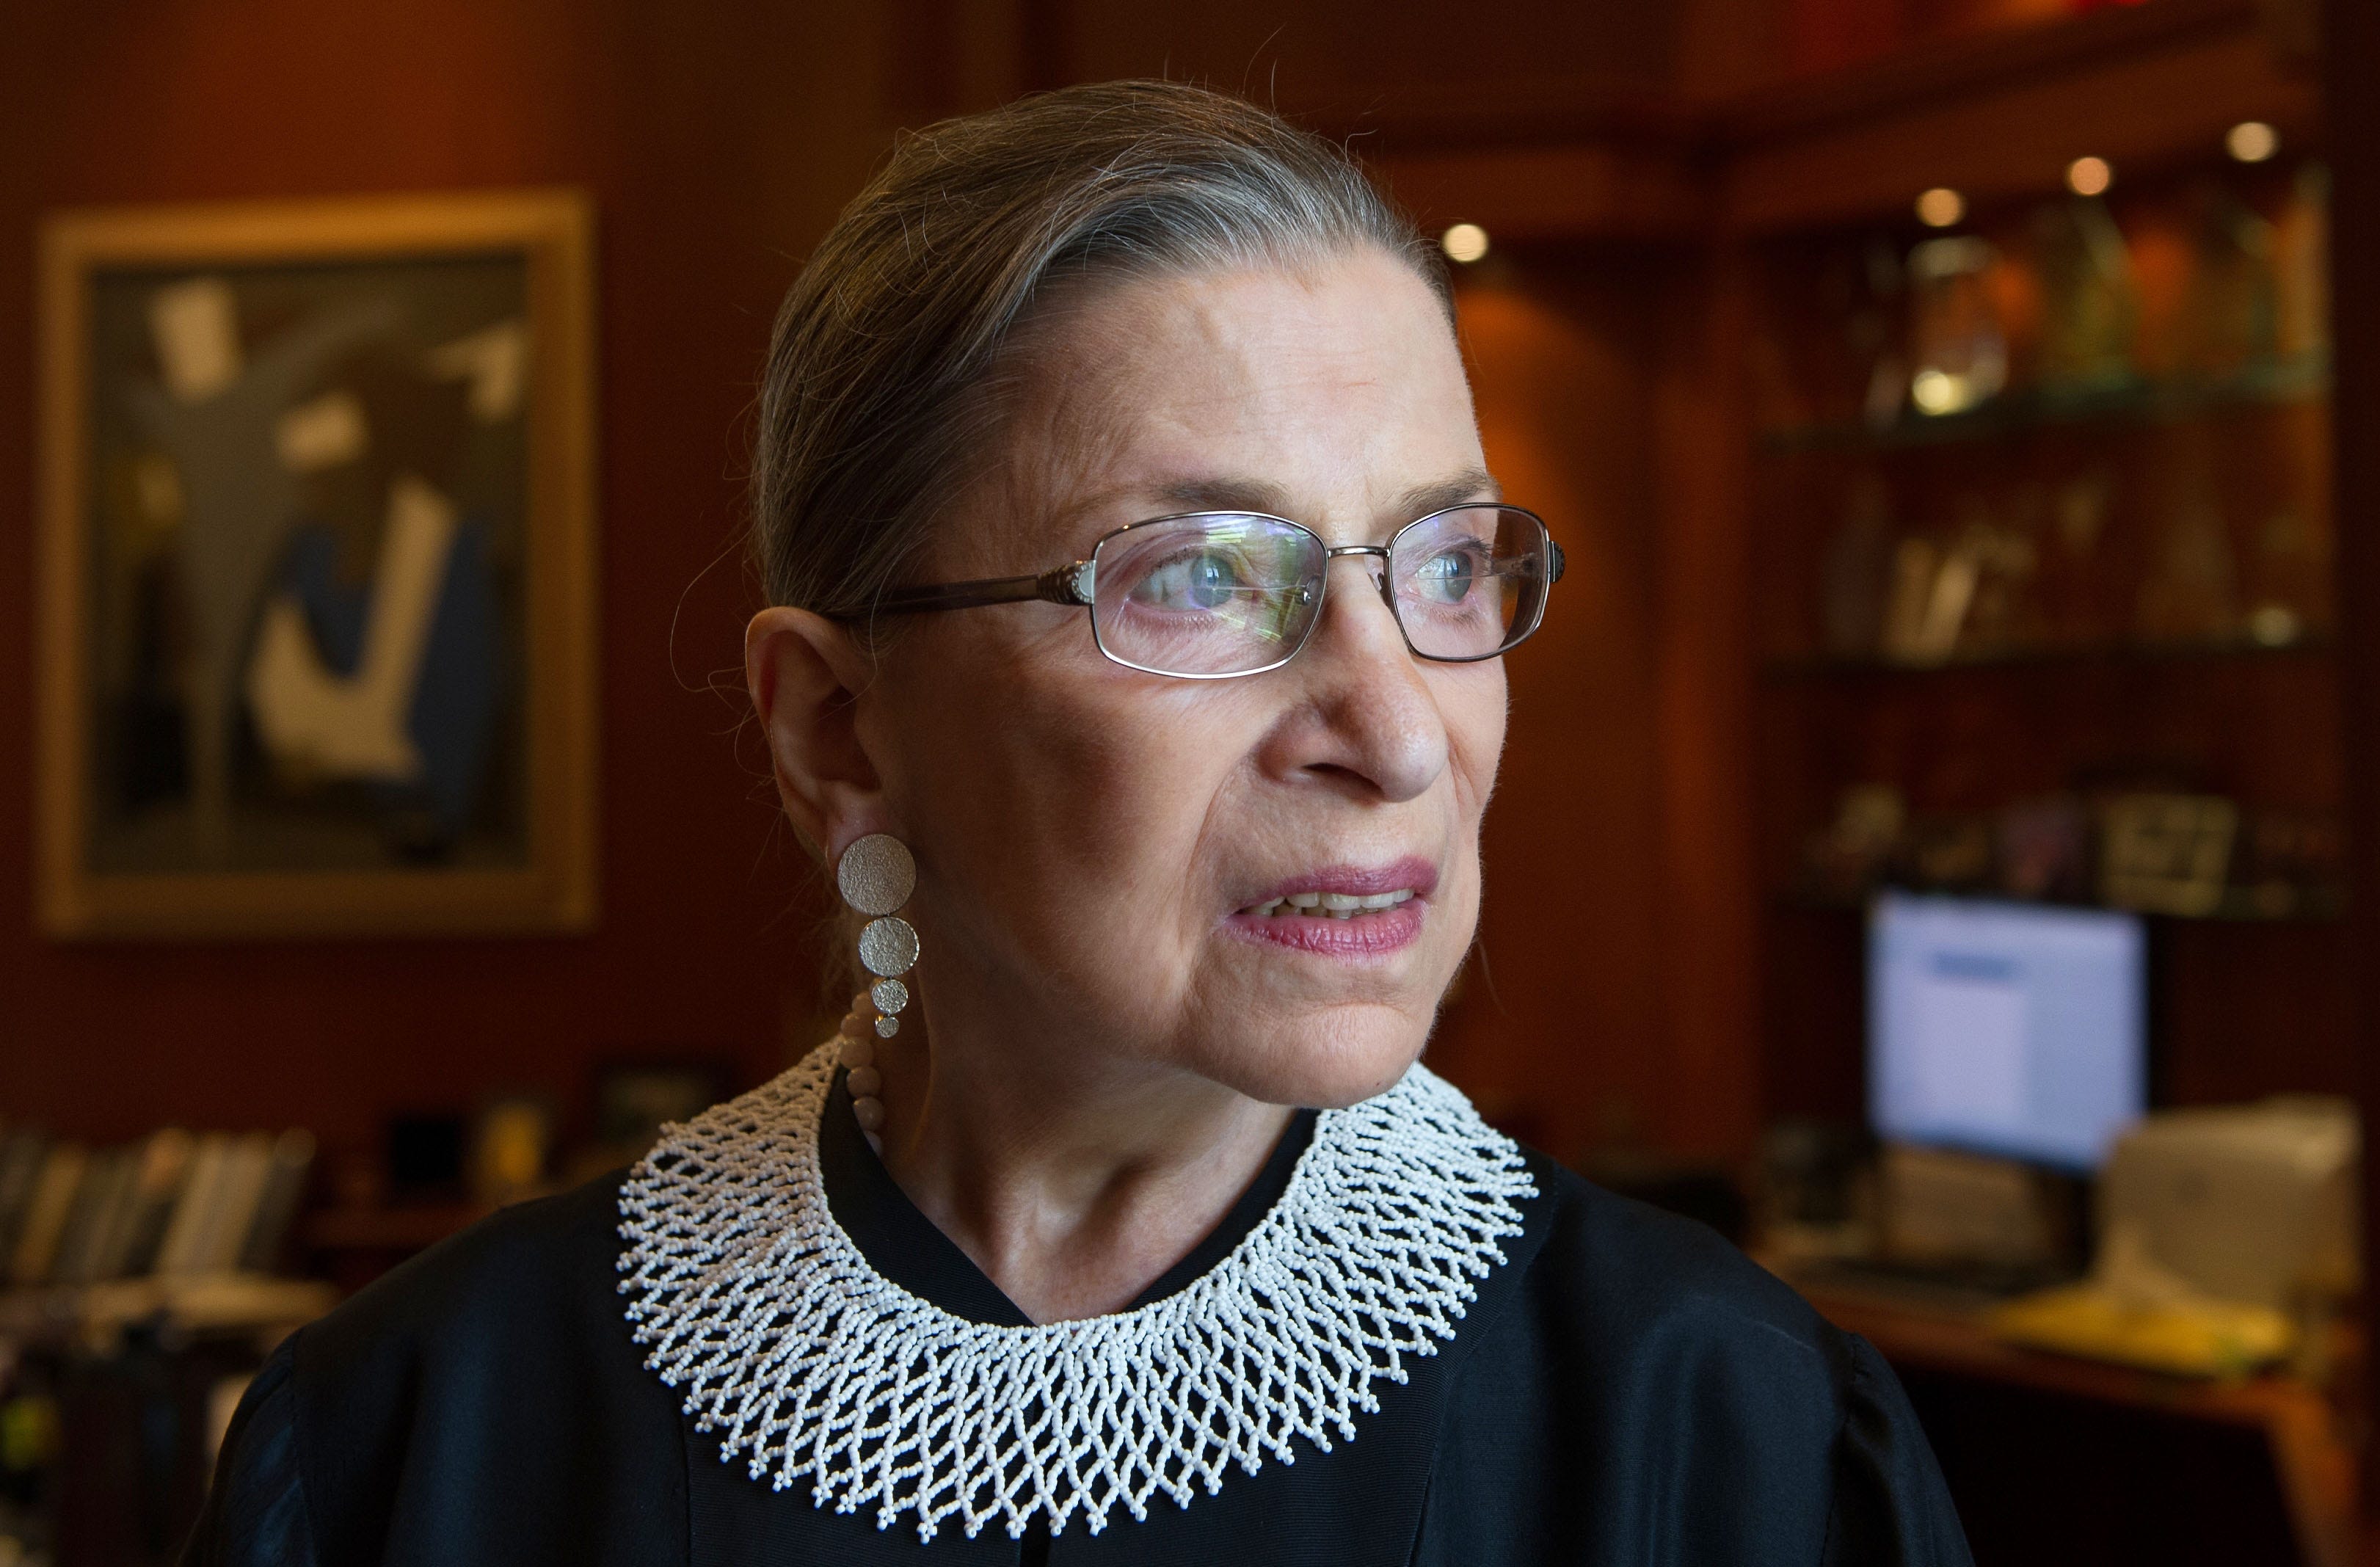 Supreme Court Associate Justice Ruth Bader Ginsburg, who died of metastatic pancreatic cancer at age 87, was the first woman to lie in state at the U.S. Capitol.